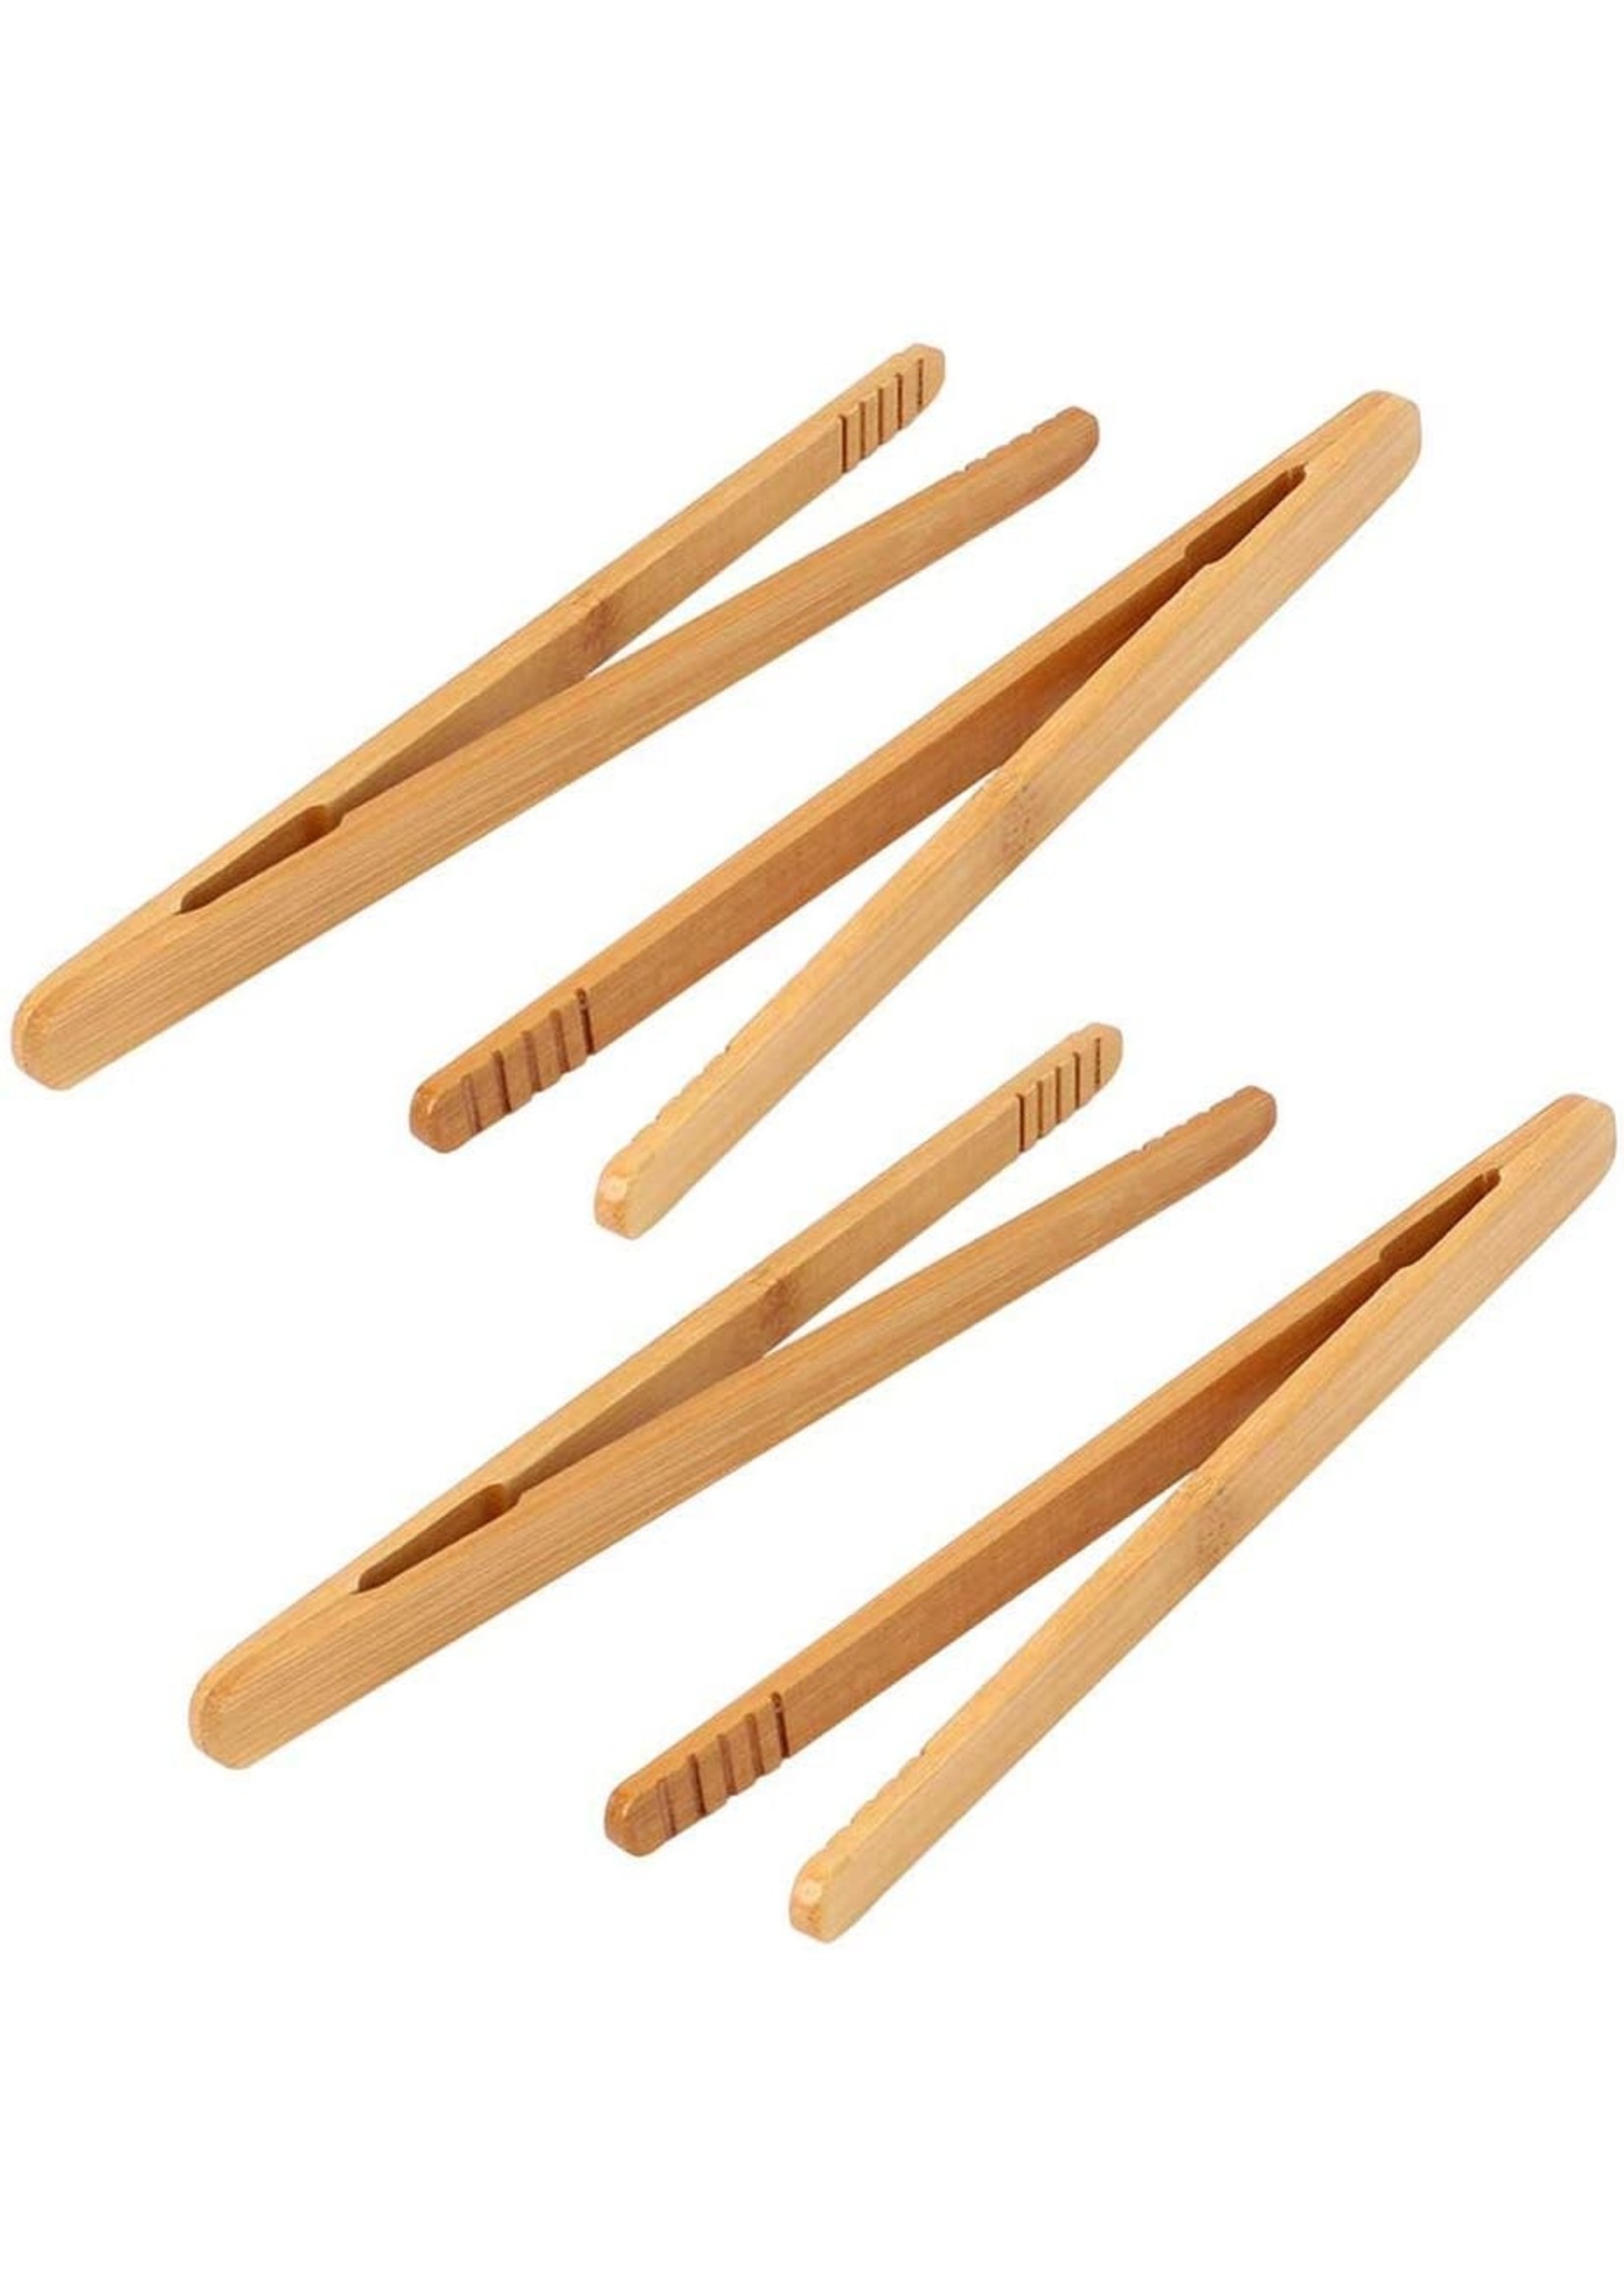 At Home by Mirabeau 7" 4 Piece Wooden Charcuterie Tong Set